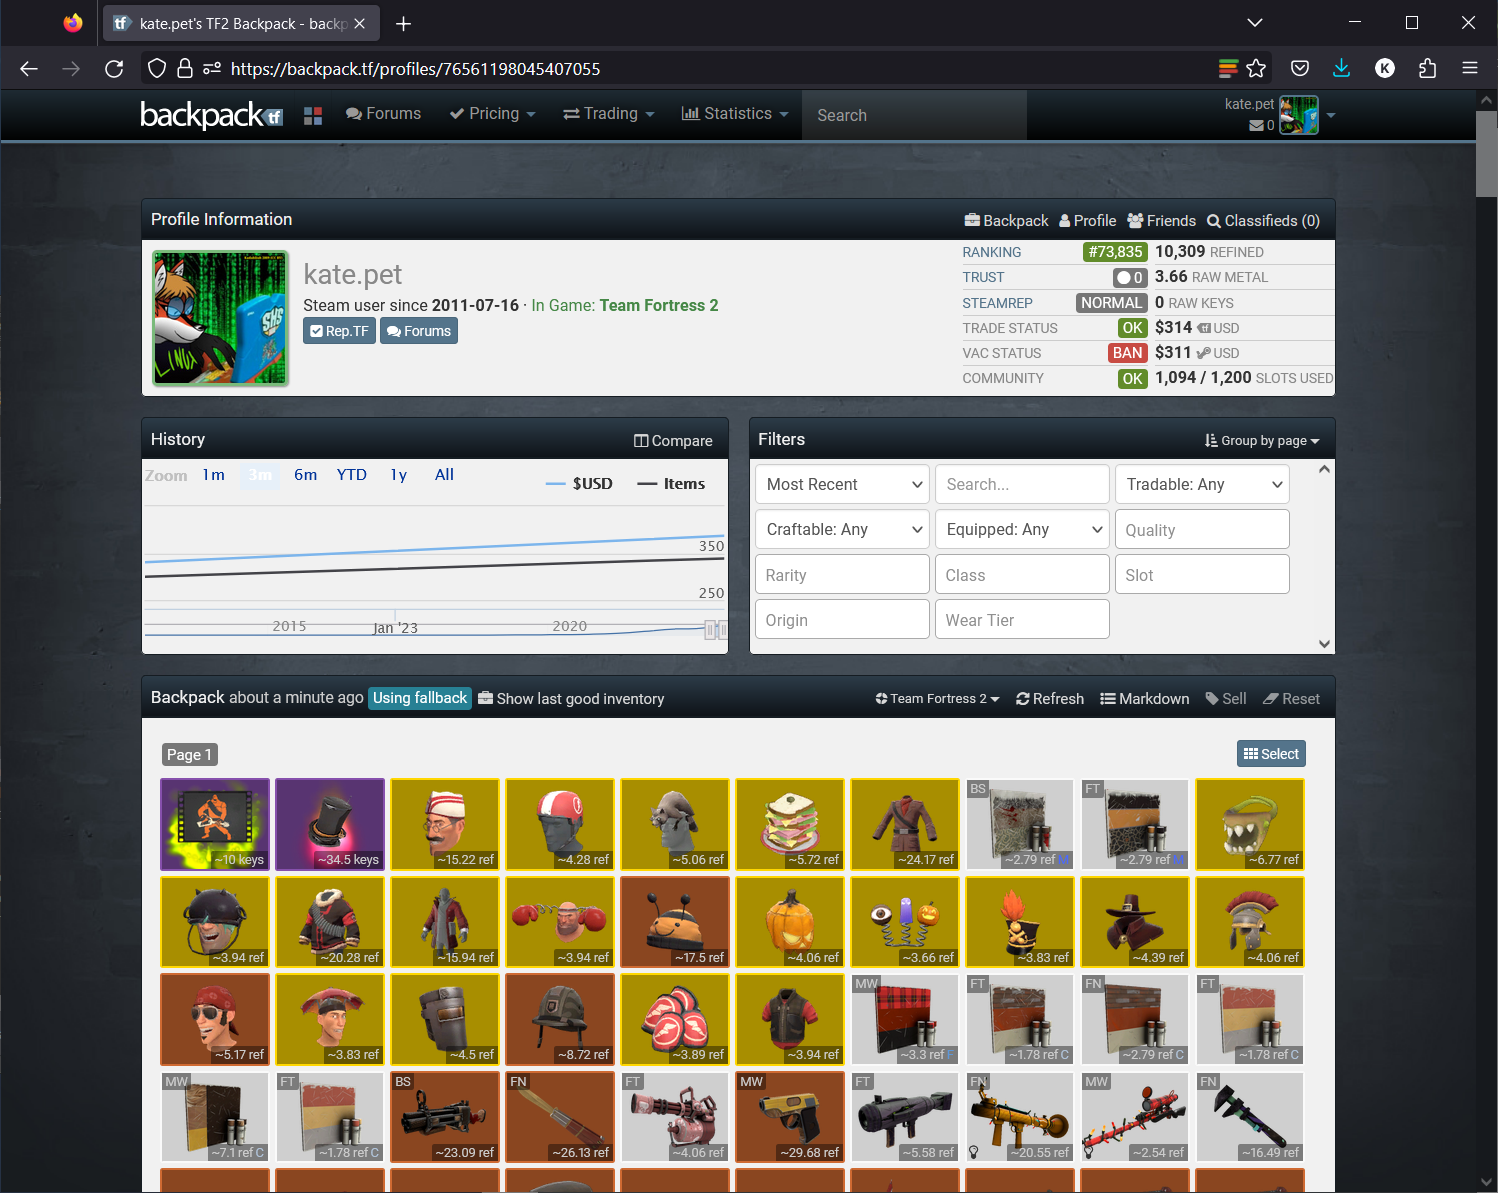 Favorite Steam background? - General Discussion - backpack.tf forums